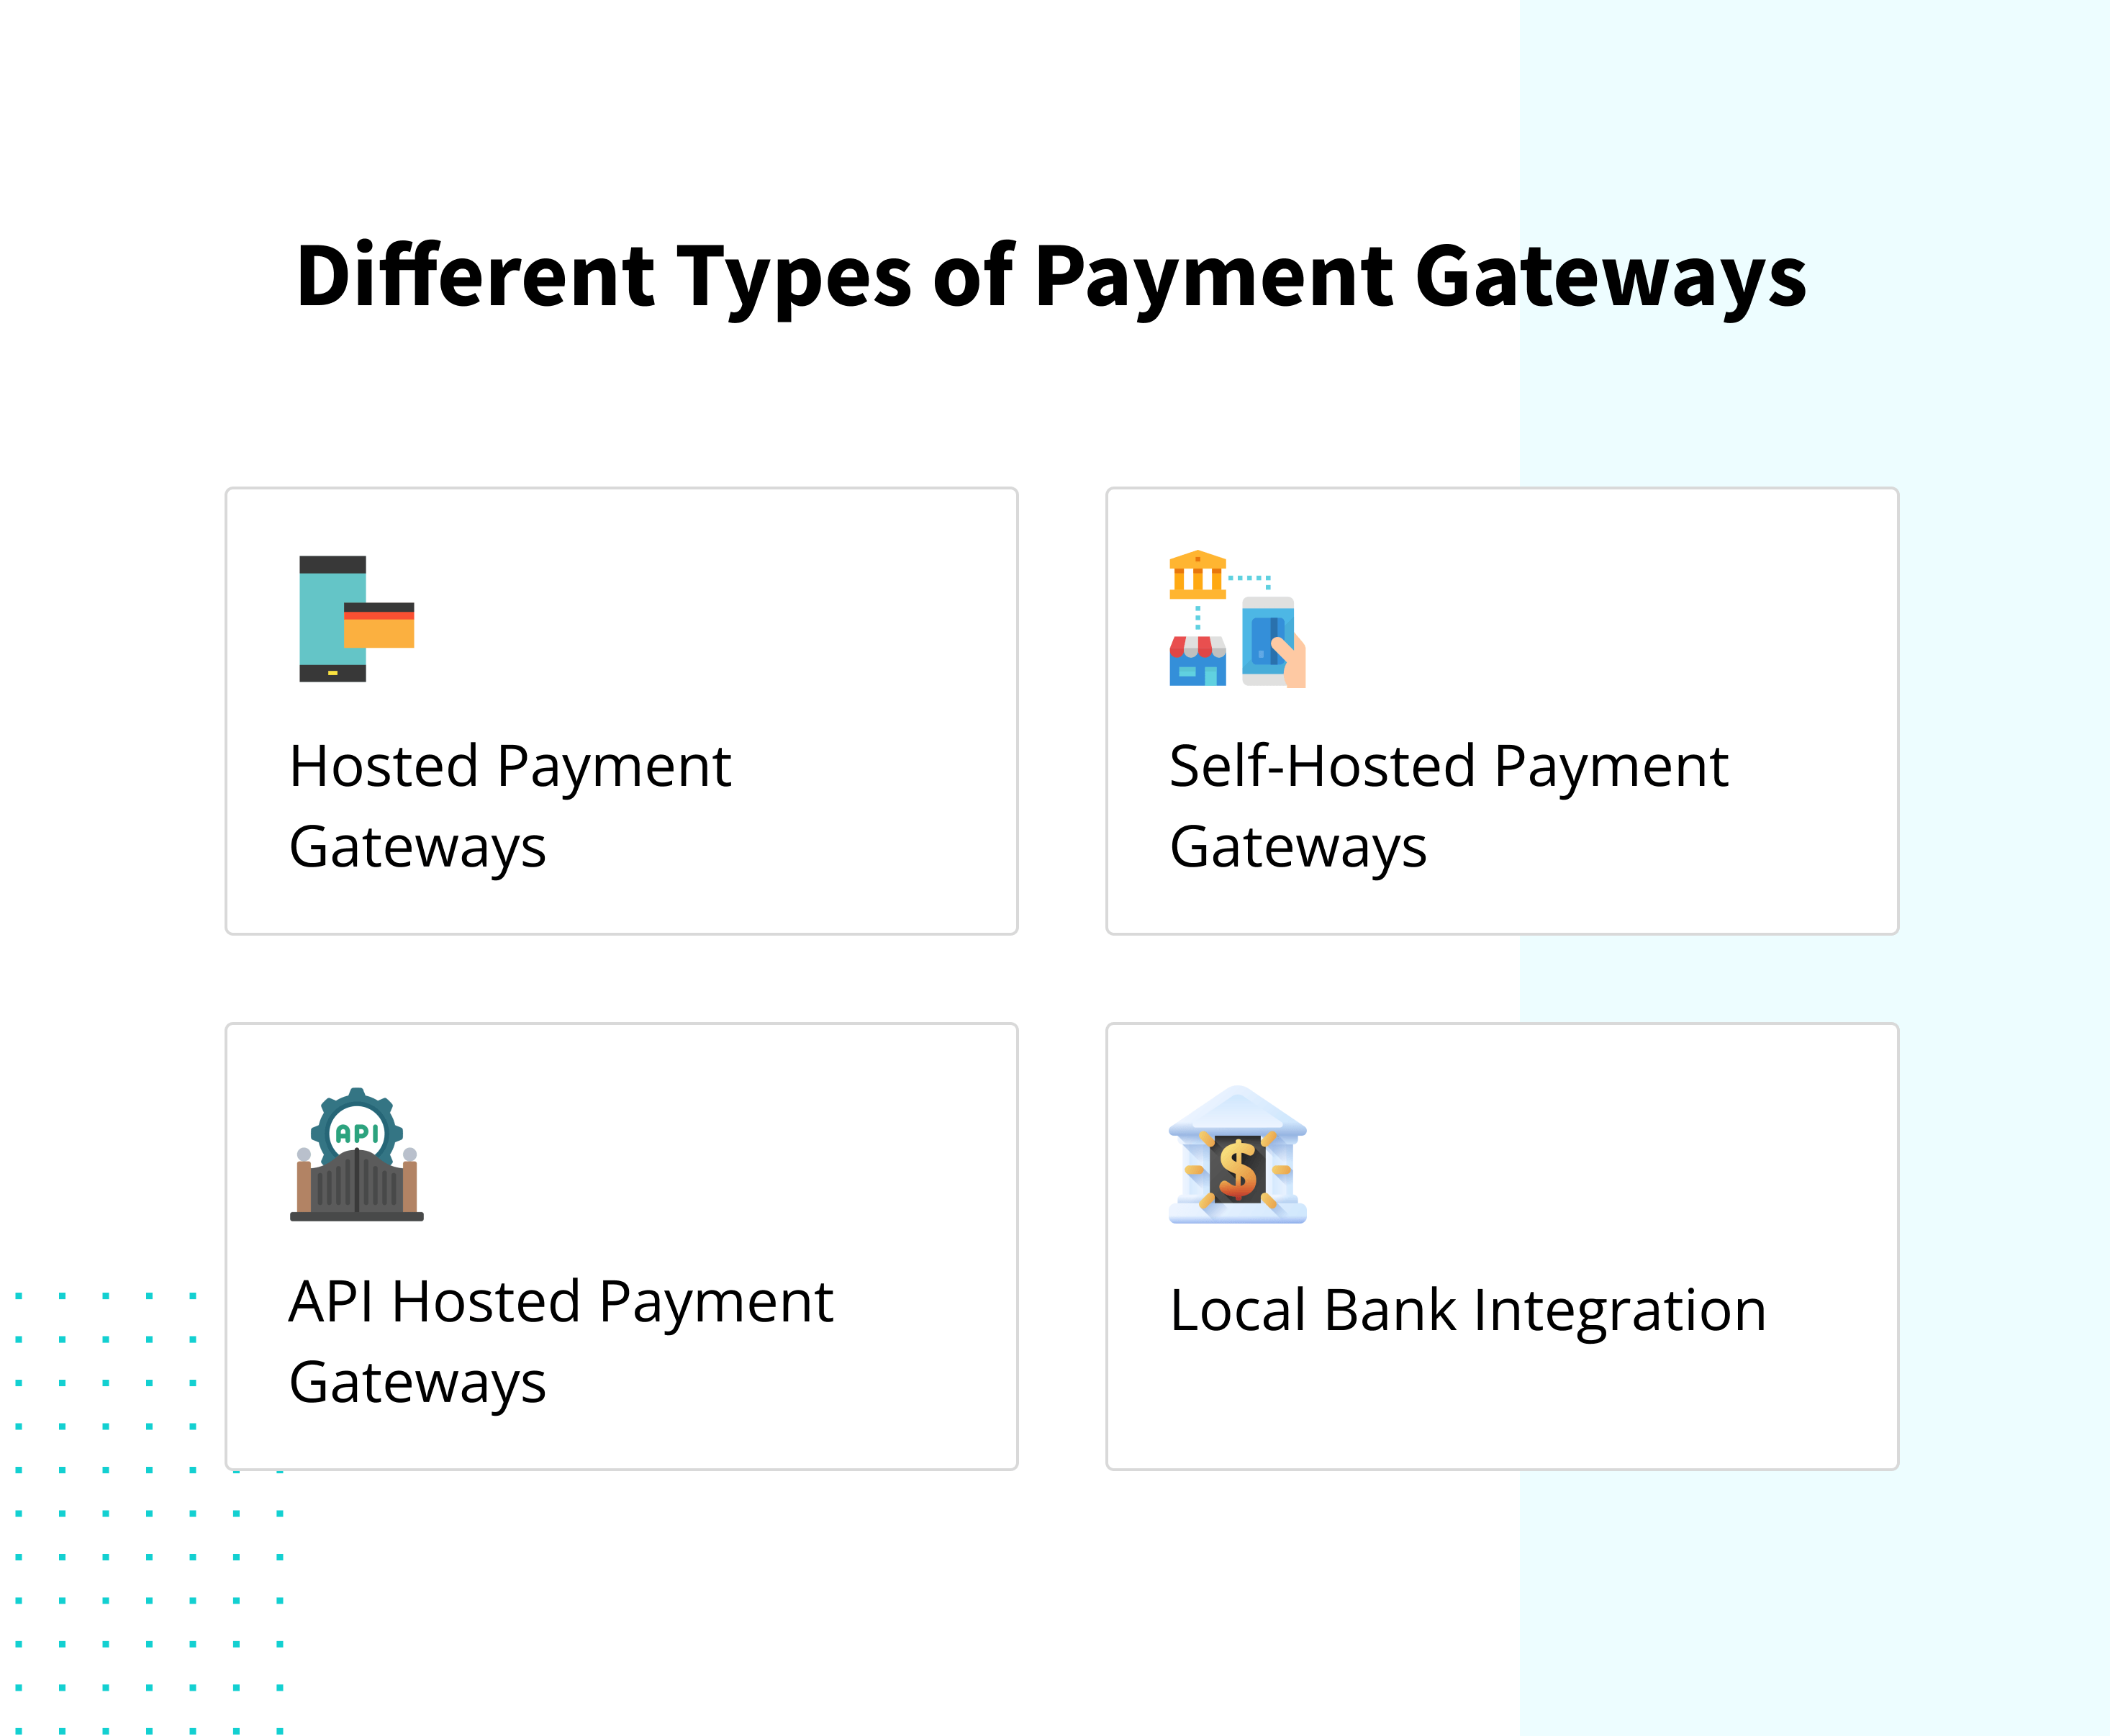 Different Types of Payment Gateways